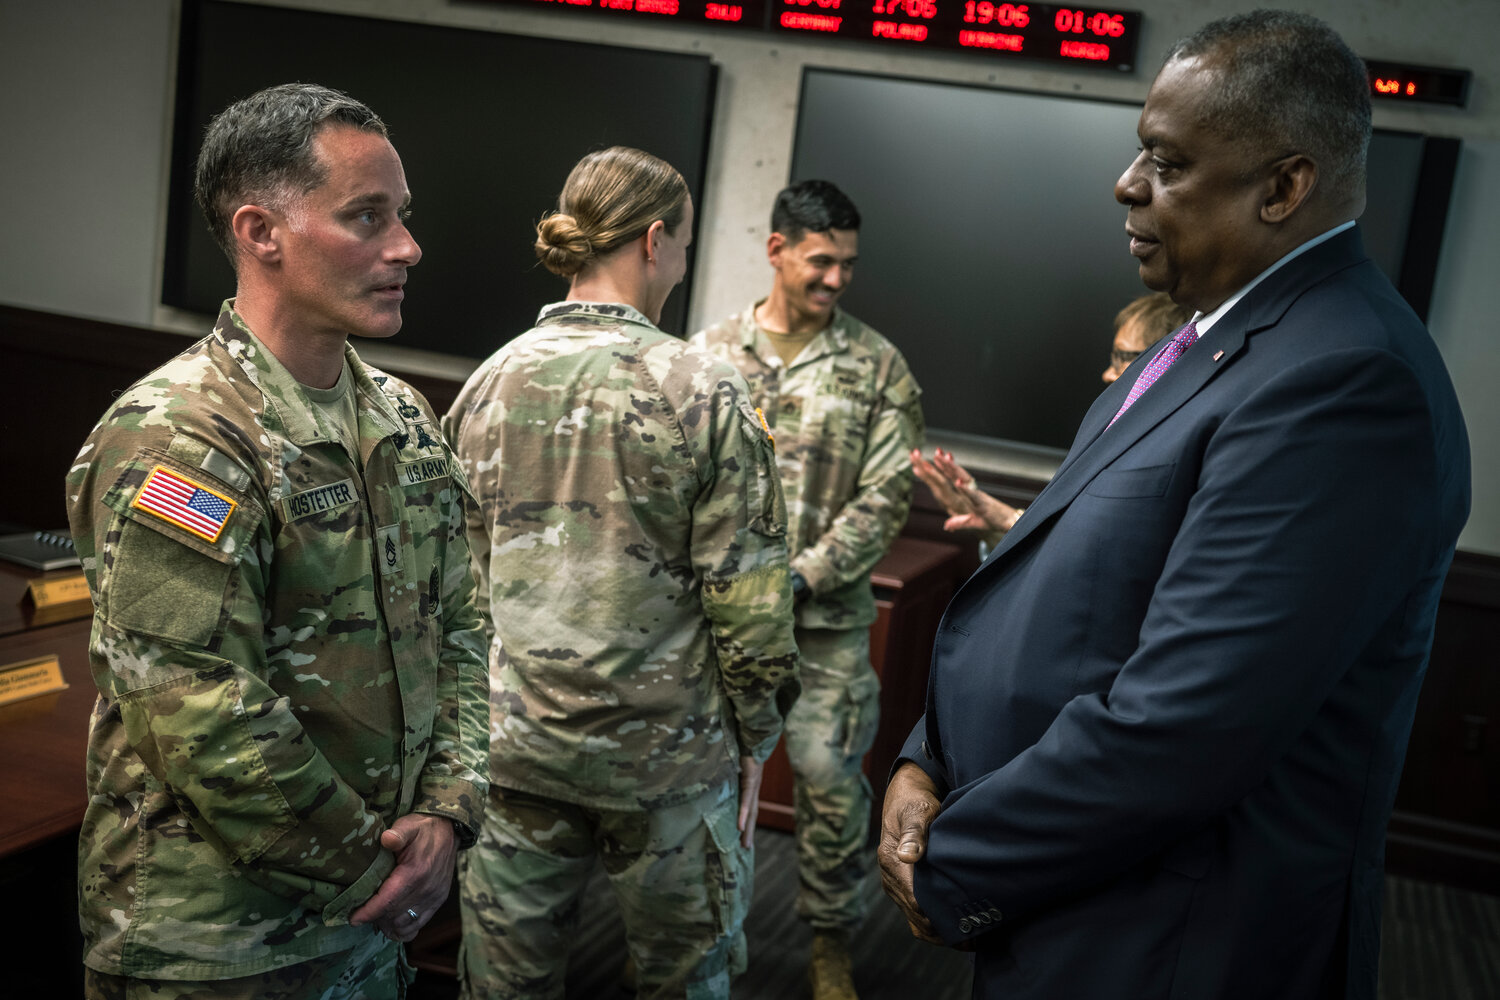 Secretary of Defense Lloyd J. Austin III speaks with Sgt. 1st Class Brian Hostetter during a visit with families assigned to the 82nd Airborne Division at Fort Bragg on Friday.